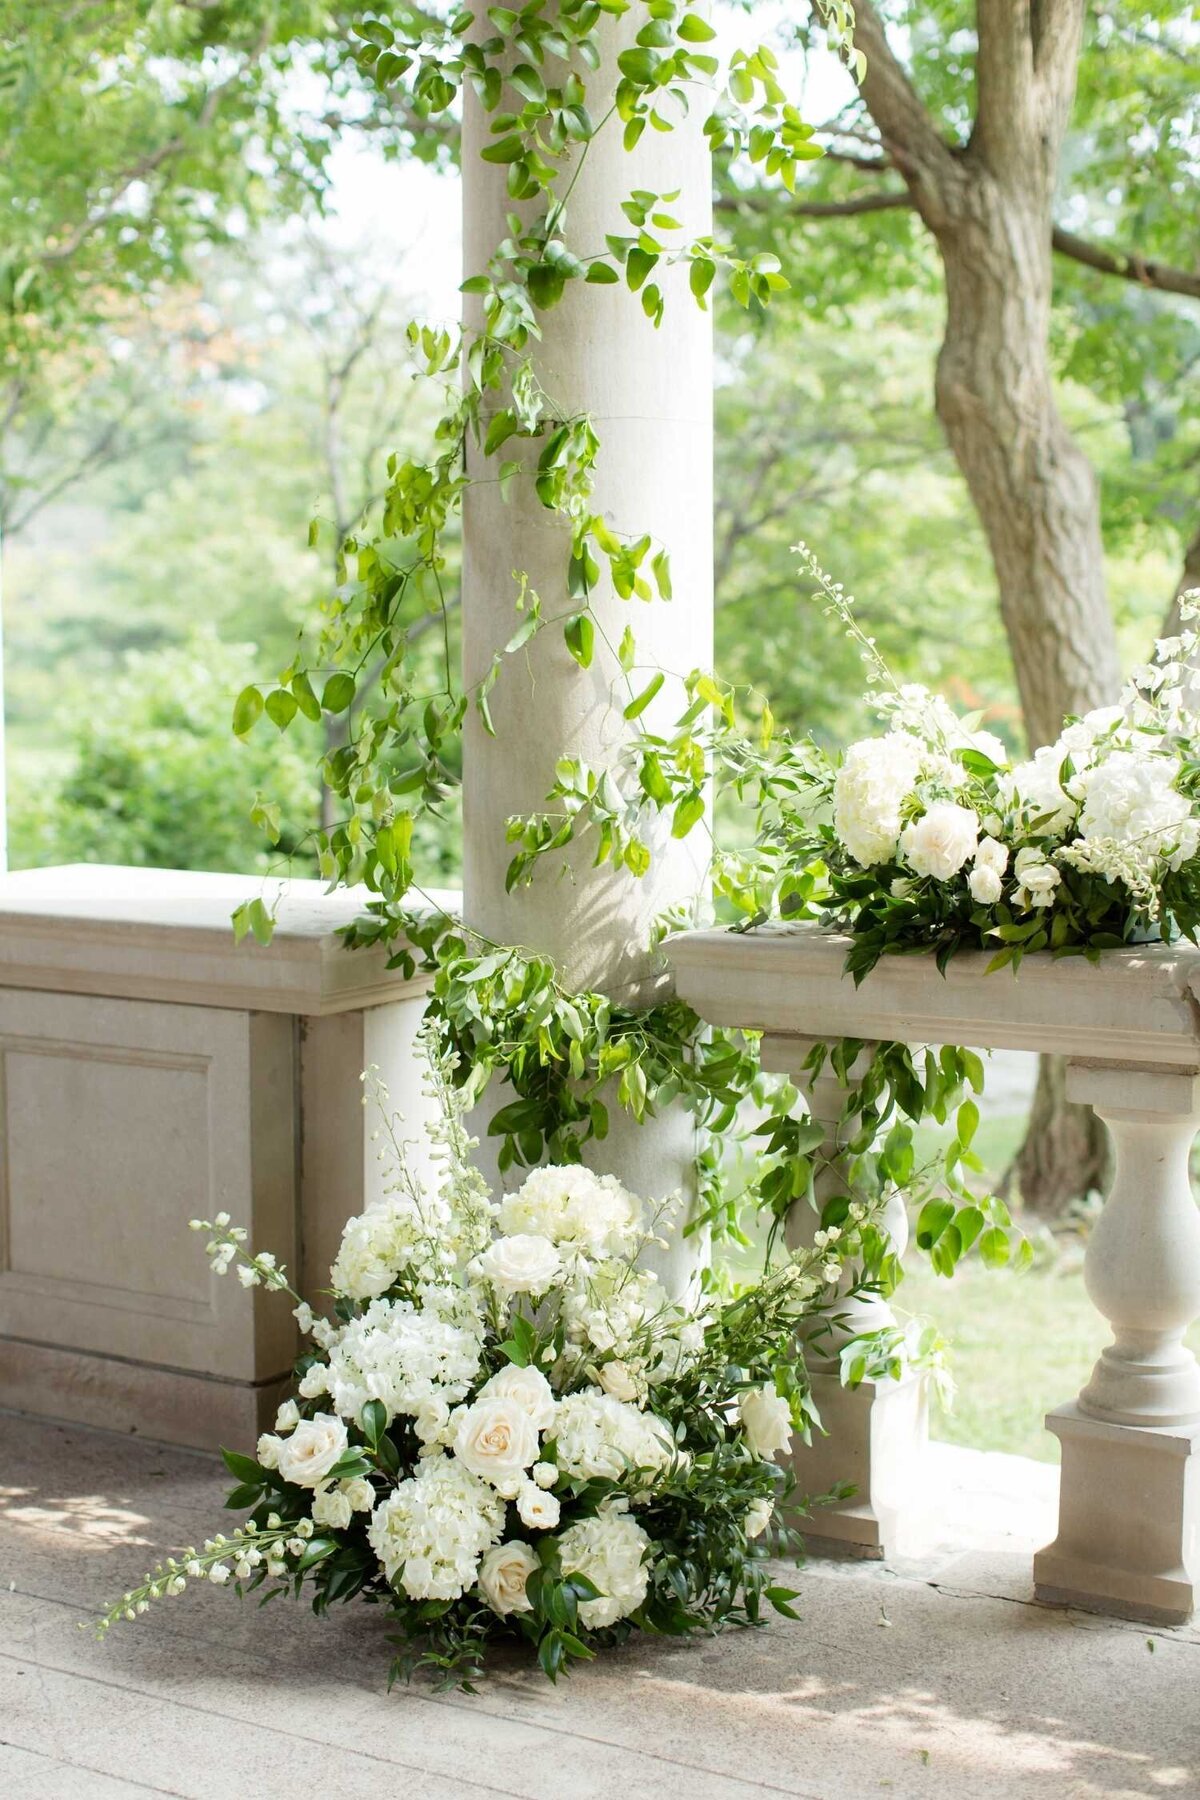 Lush garden ceremony flowers with climbing greenery at Luxury Chicago Outdoor Historic Wedding Venue.